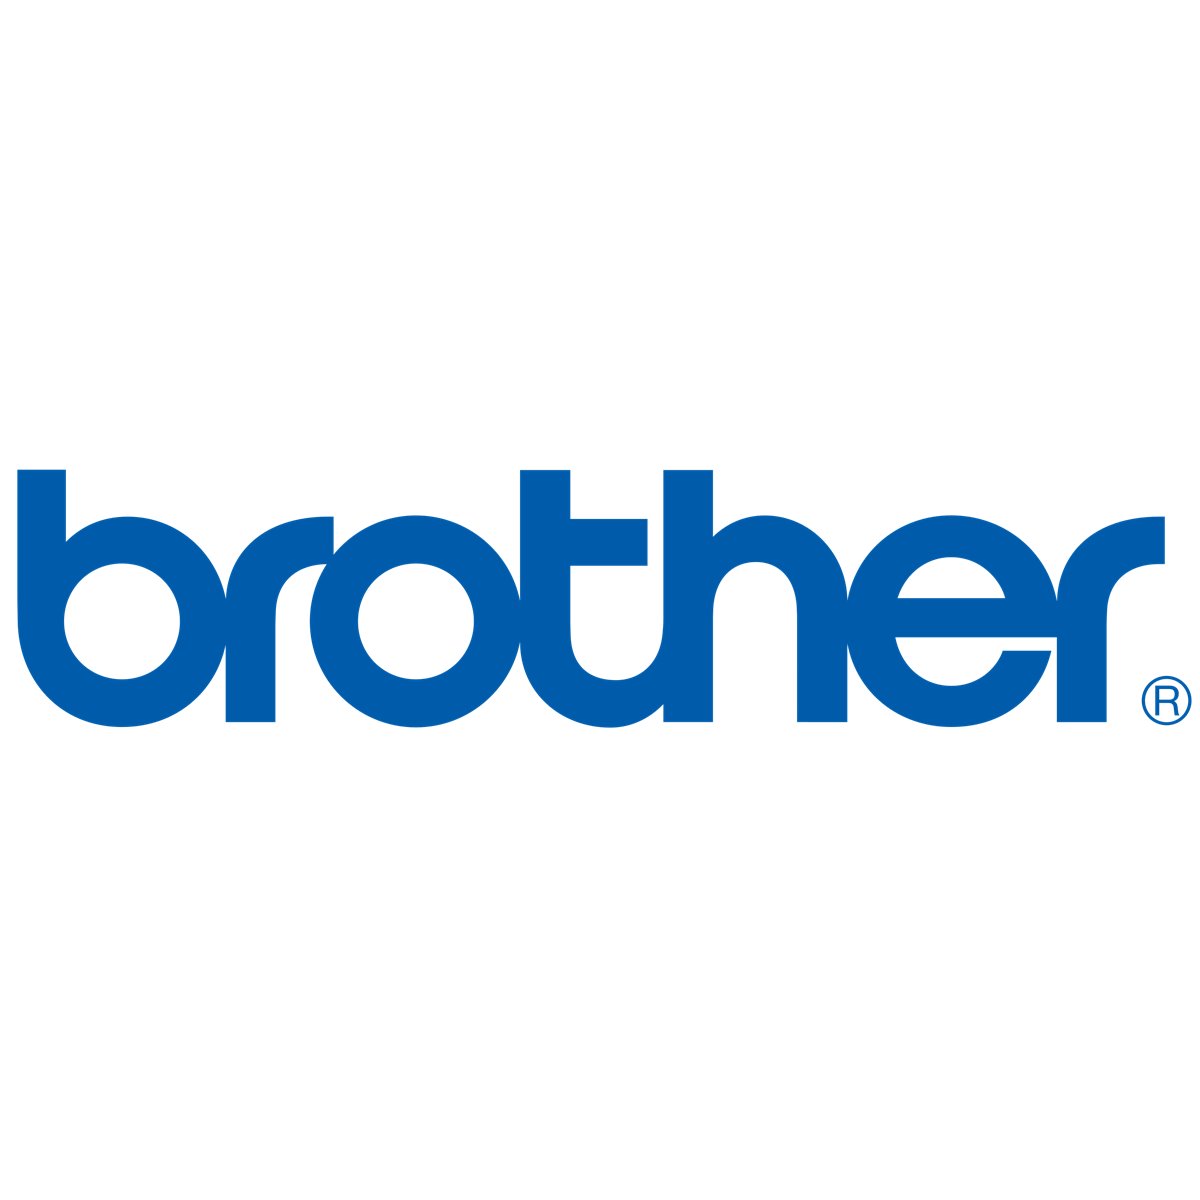 Product  Brother MFC-L3730CDN - multifunction printer - colour